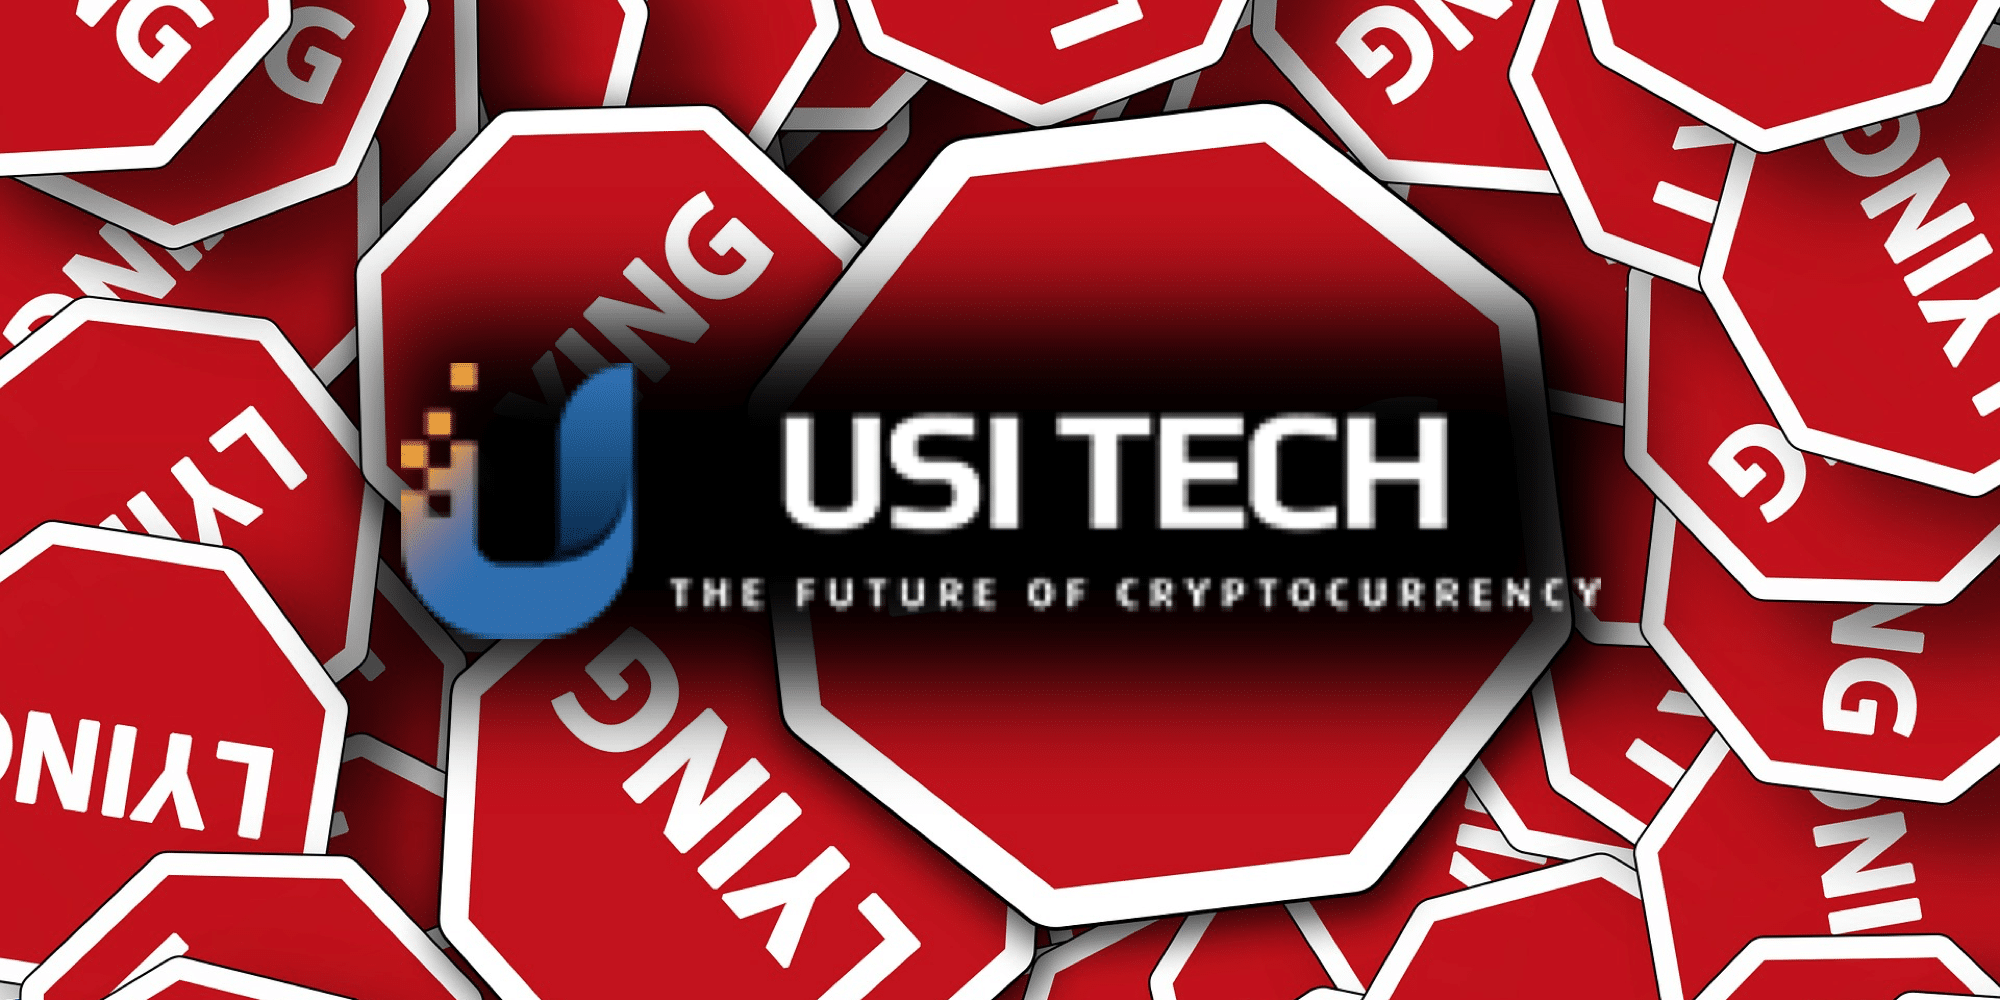 Usi tech the future of cryptocurrency bitcoin etf list